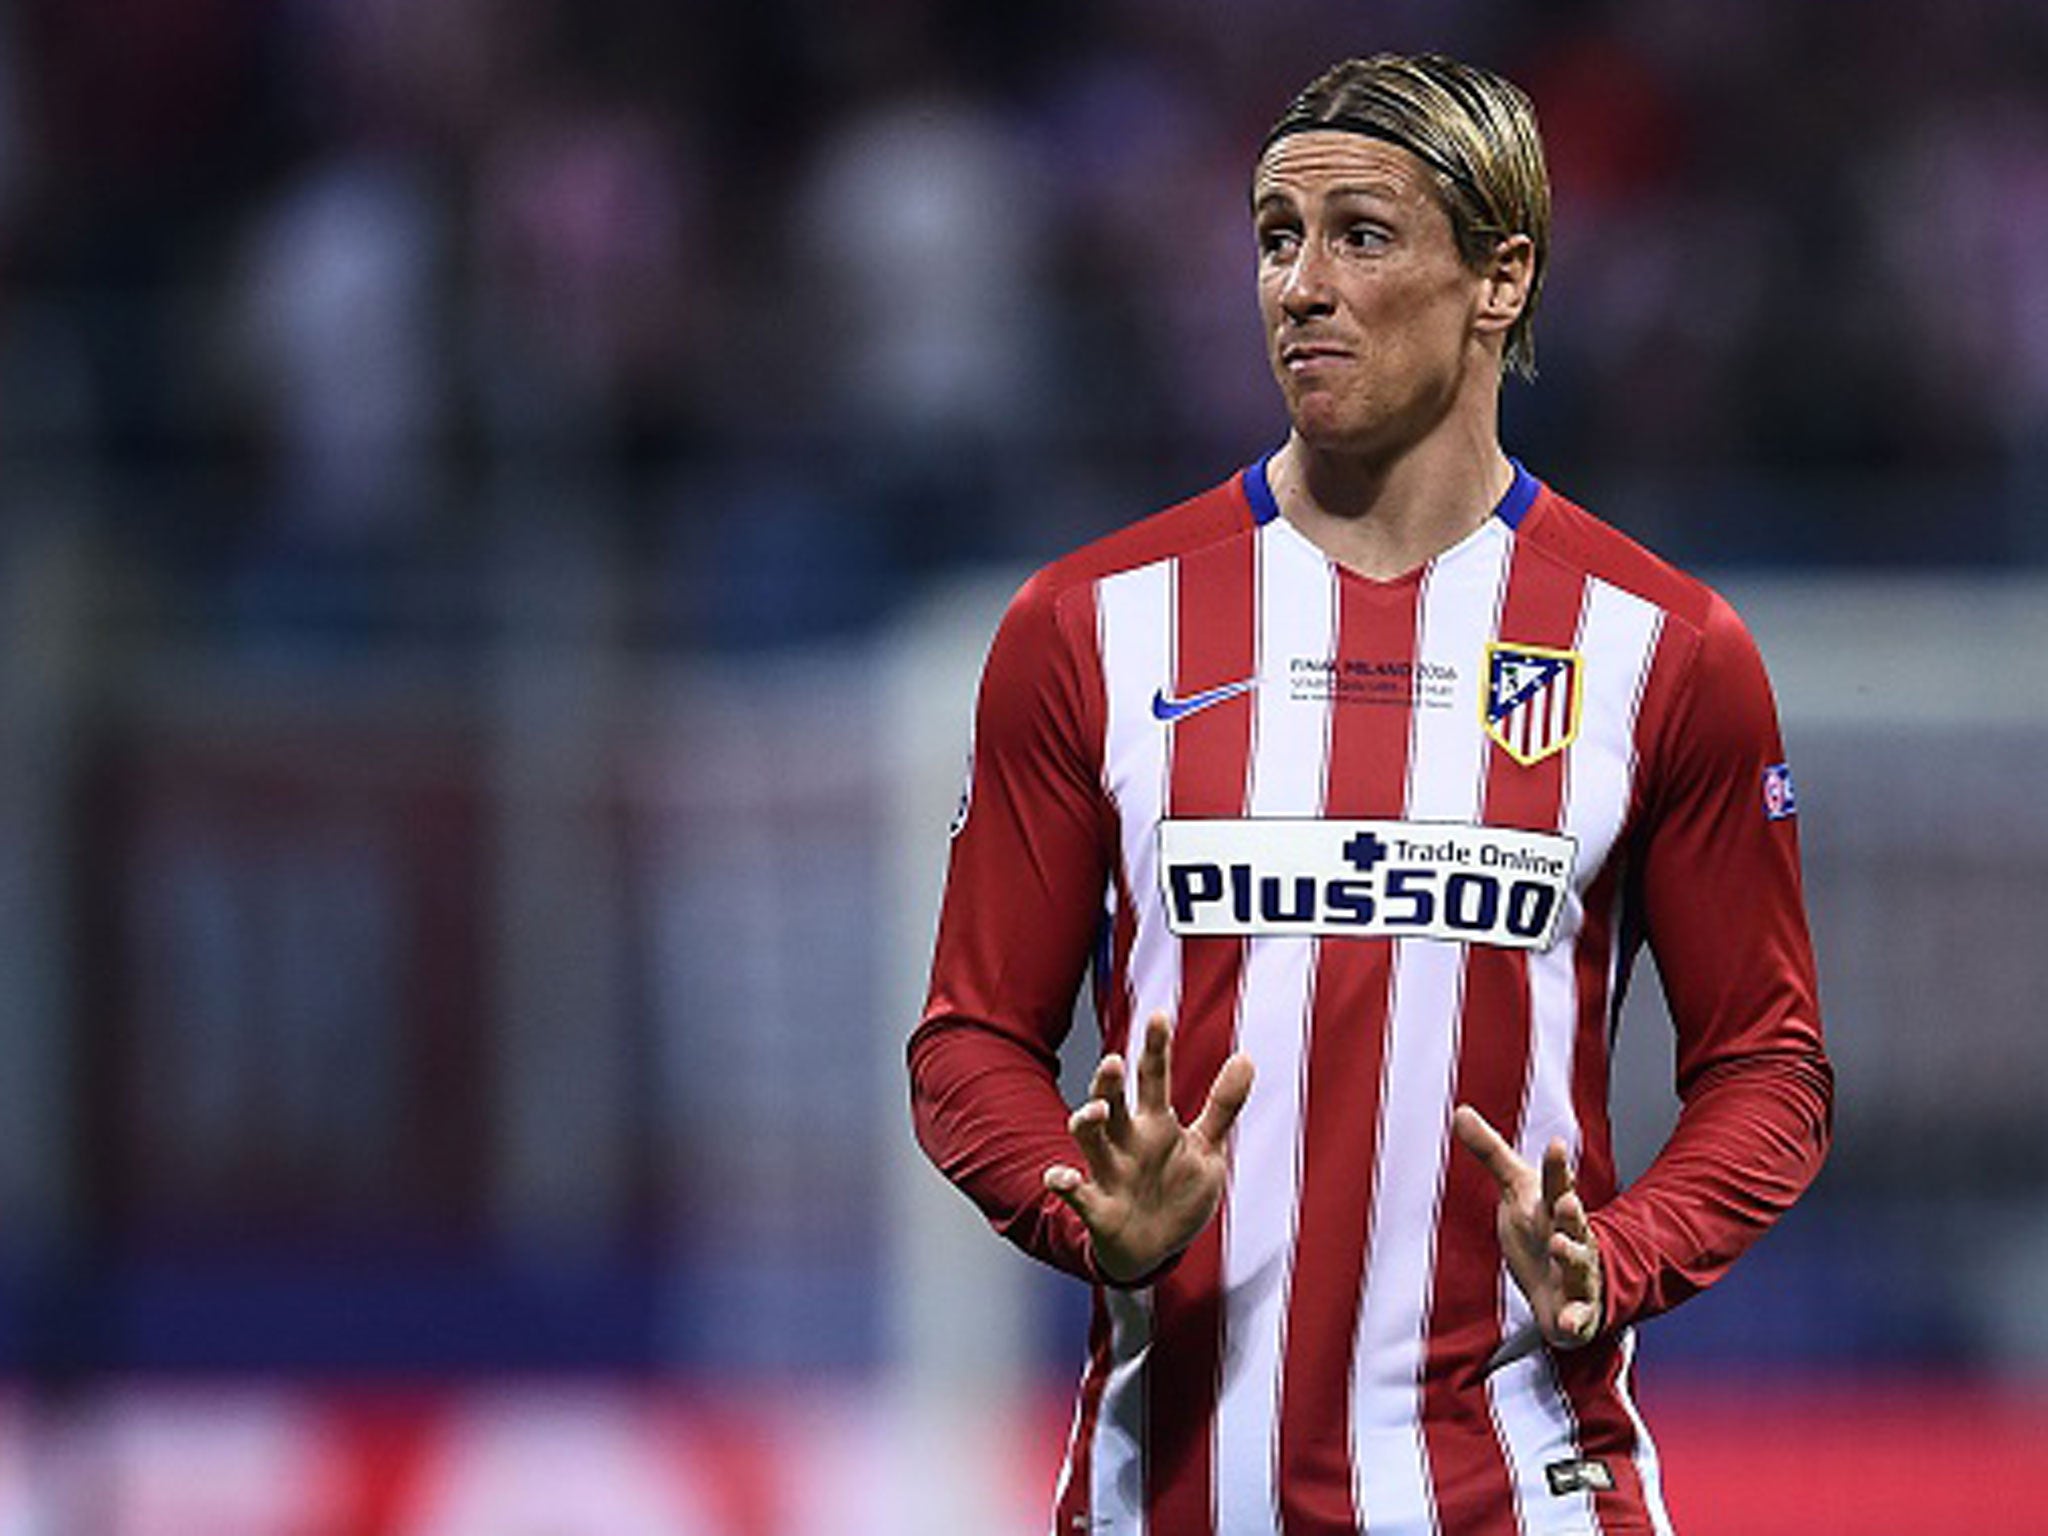 &#13;
Fernando Torres' side lost the European Cup final to their neighbours for the second time in three years &#13;